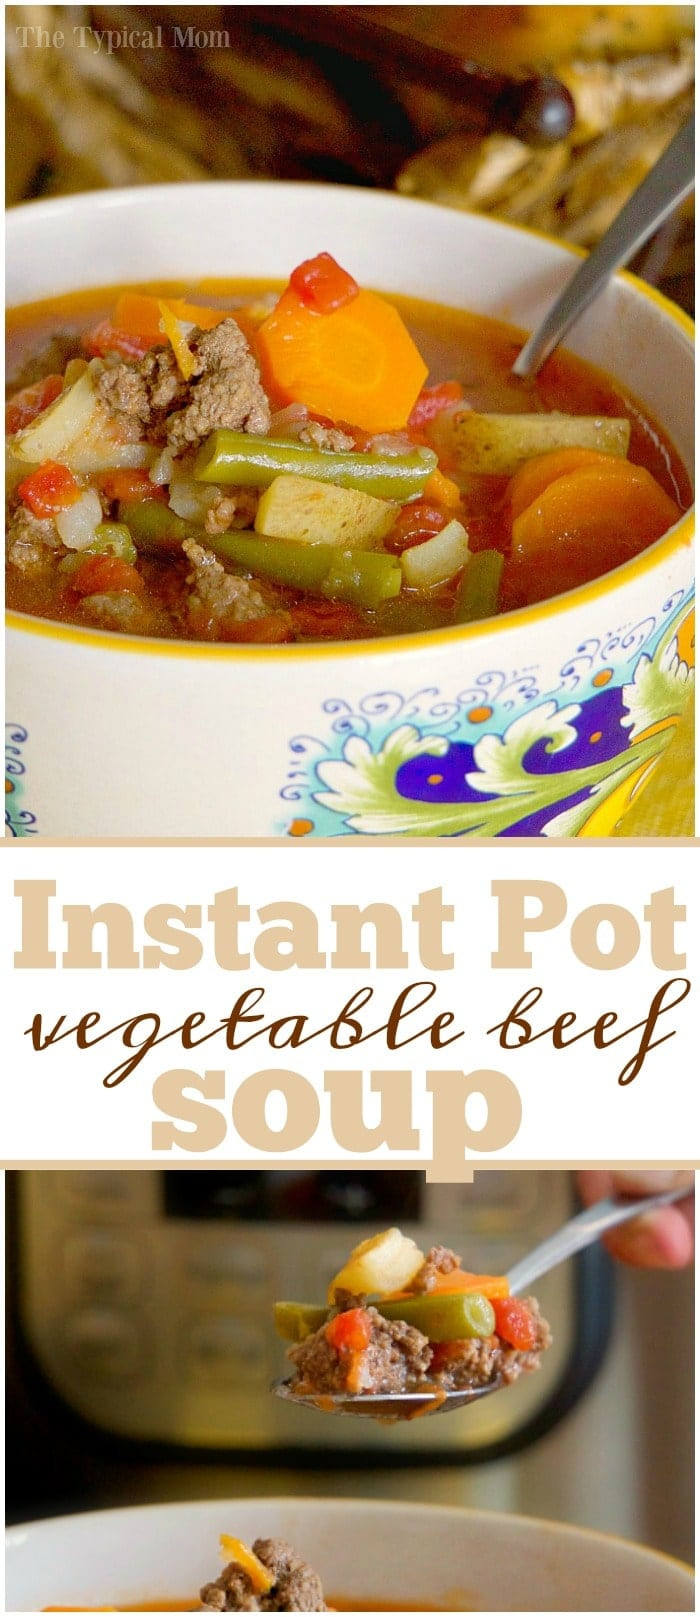 Beef Vegetable Soup Instant Pot
 Best Instant Pot Ve able Beef Soup Ground Beef or